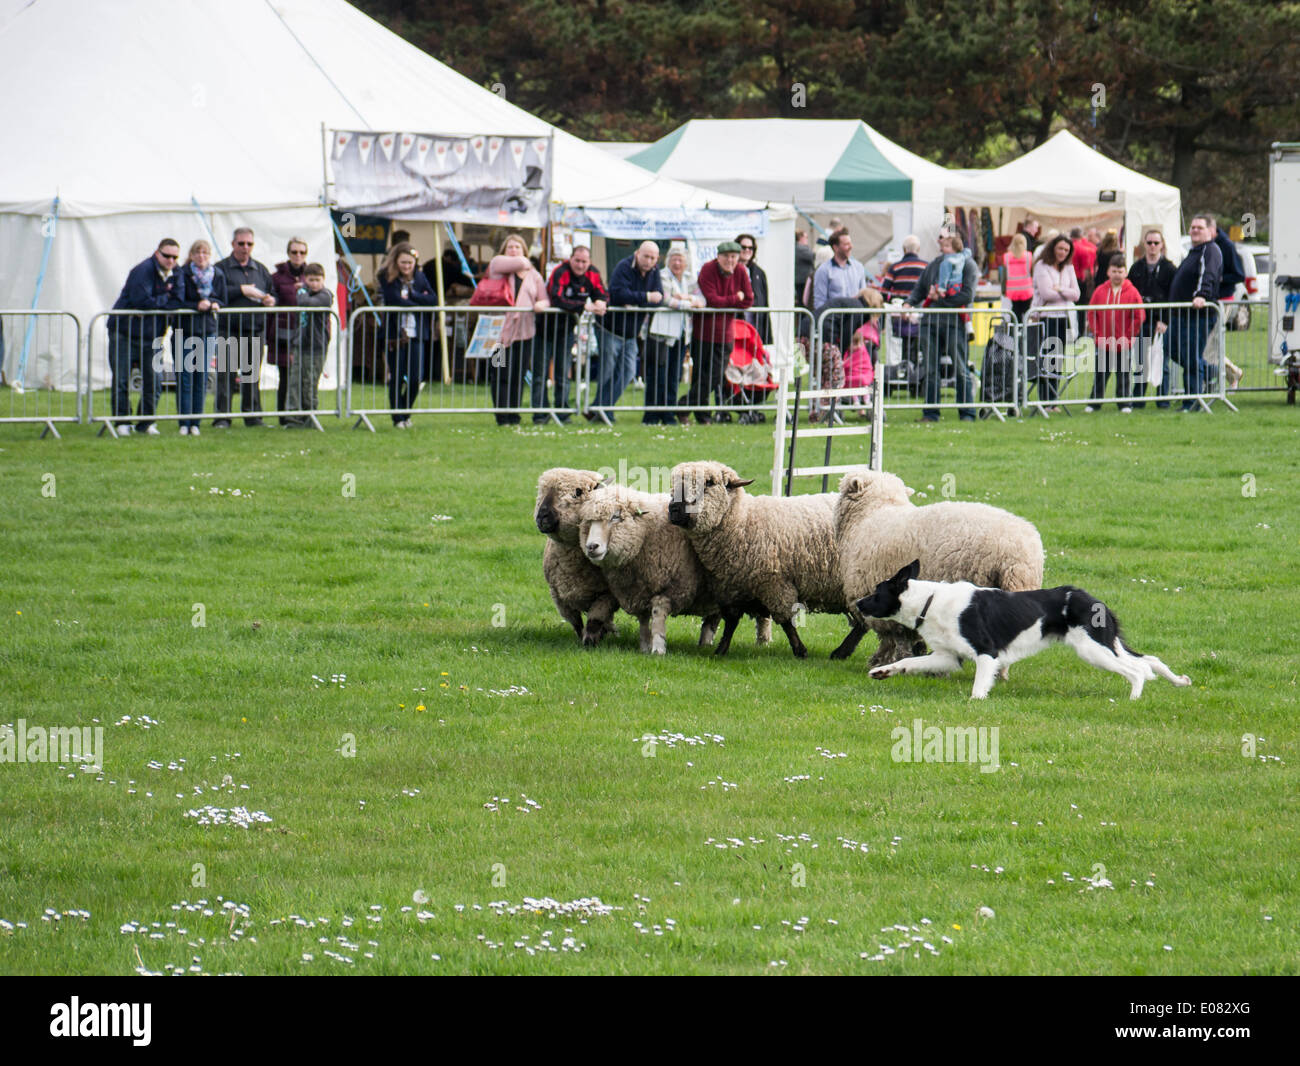 A Border Collie sheep dog rounds up sheep during a sheepdog trial Stock Photo